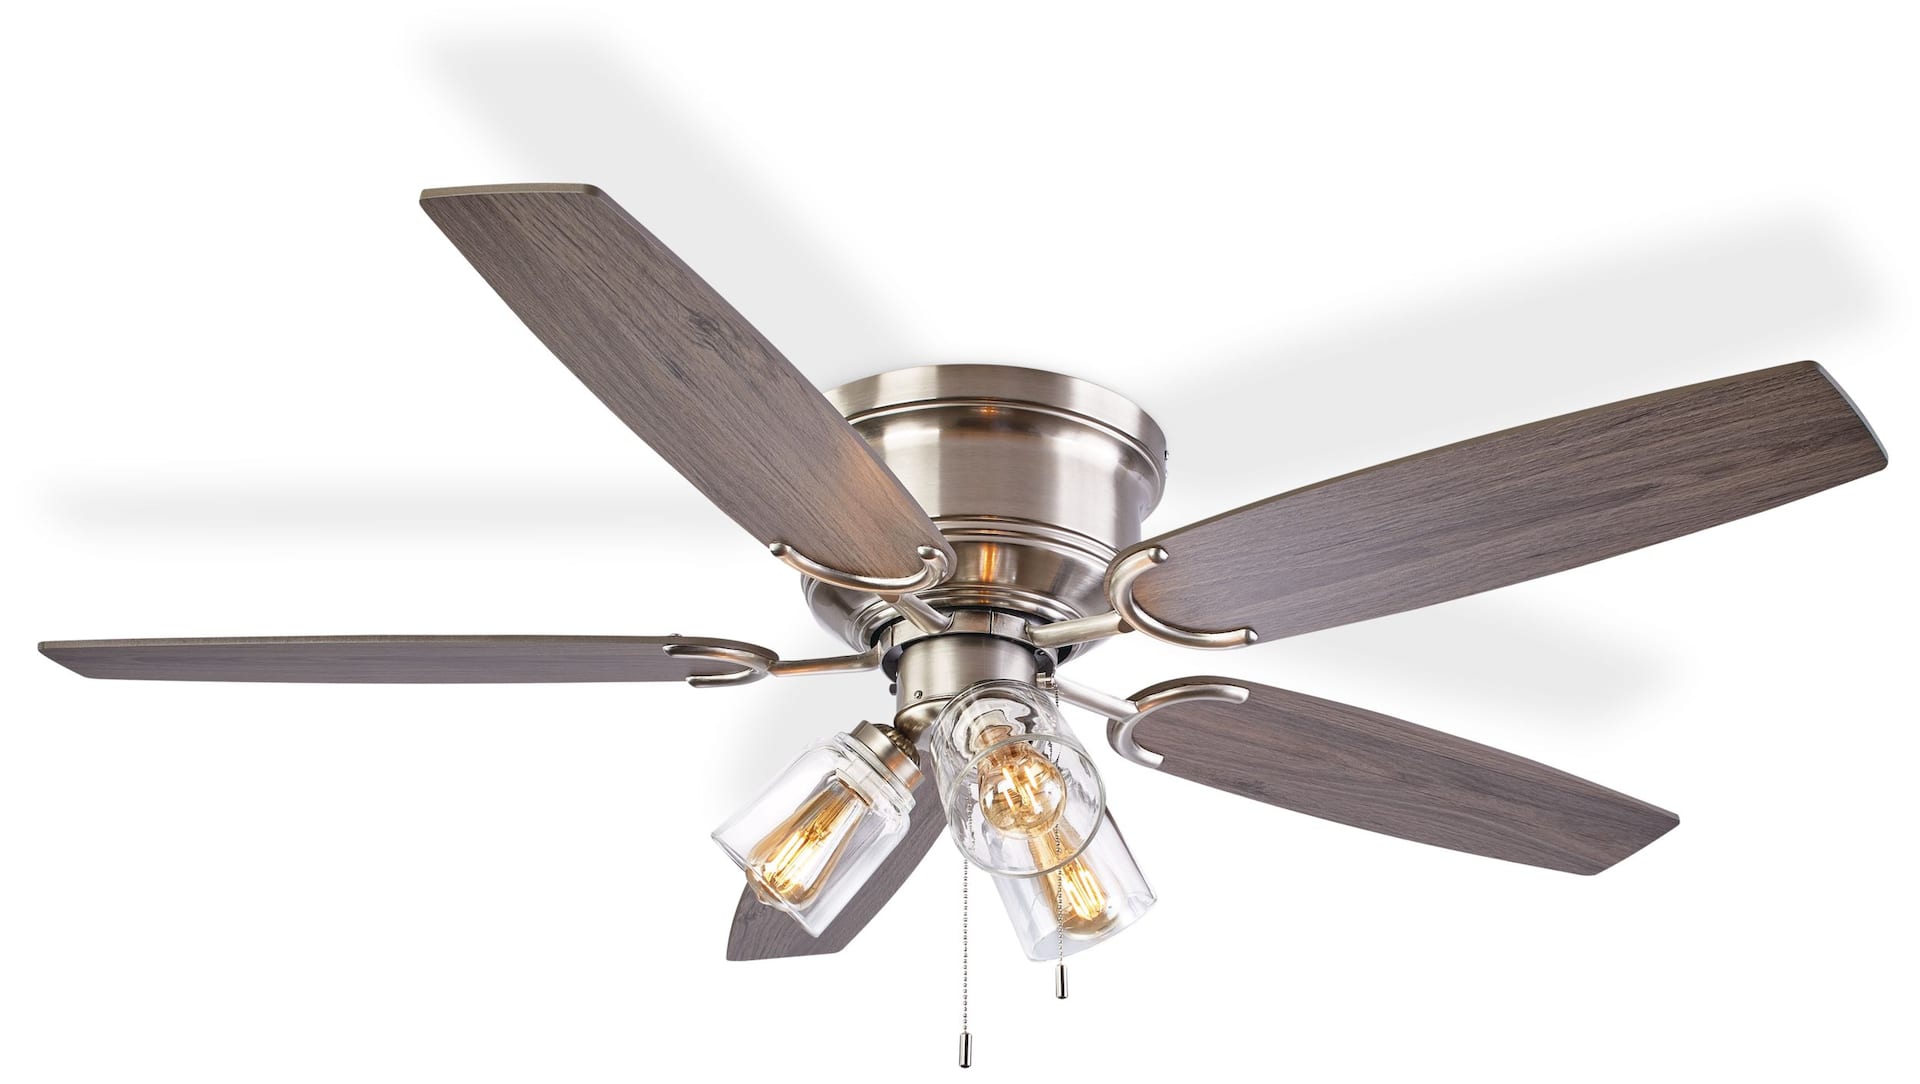 https://media-www.canadiantire.ca/product/fixing/electrical/ceiling-fans/0529714/for-living-3-lt-ceiling-fan-265c34fc-b68b-427a-a0be-7a5d9375bf6e-jpgrendition.jpg